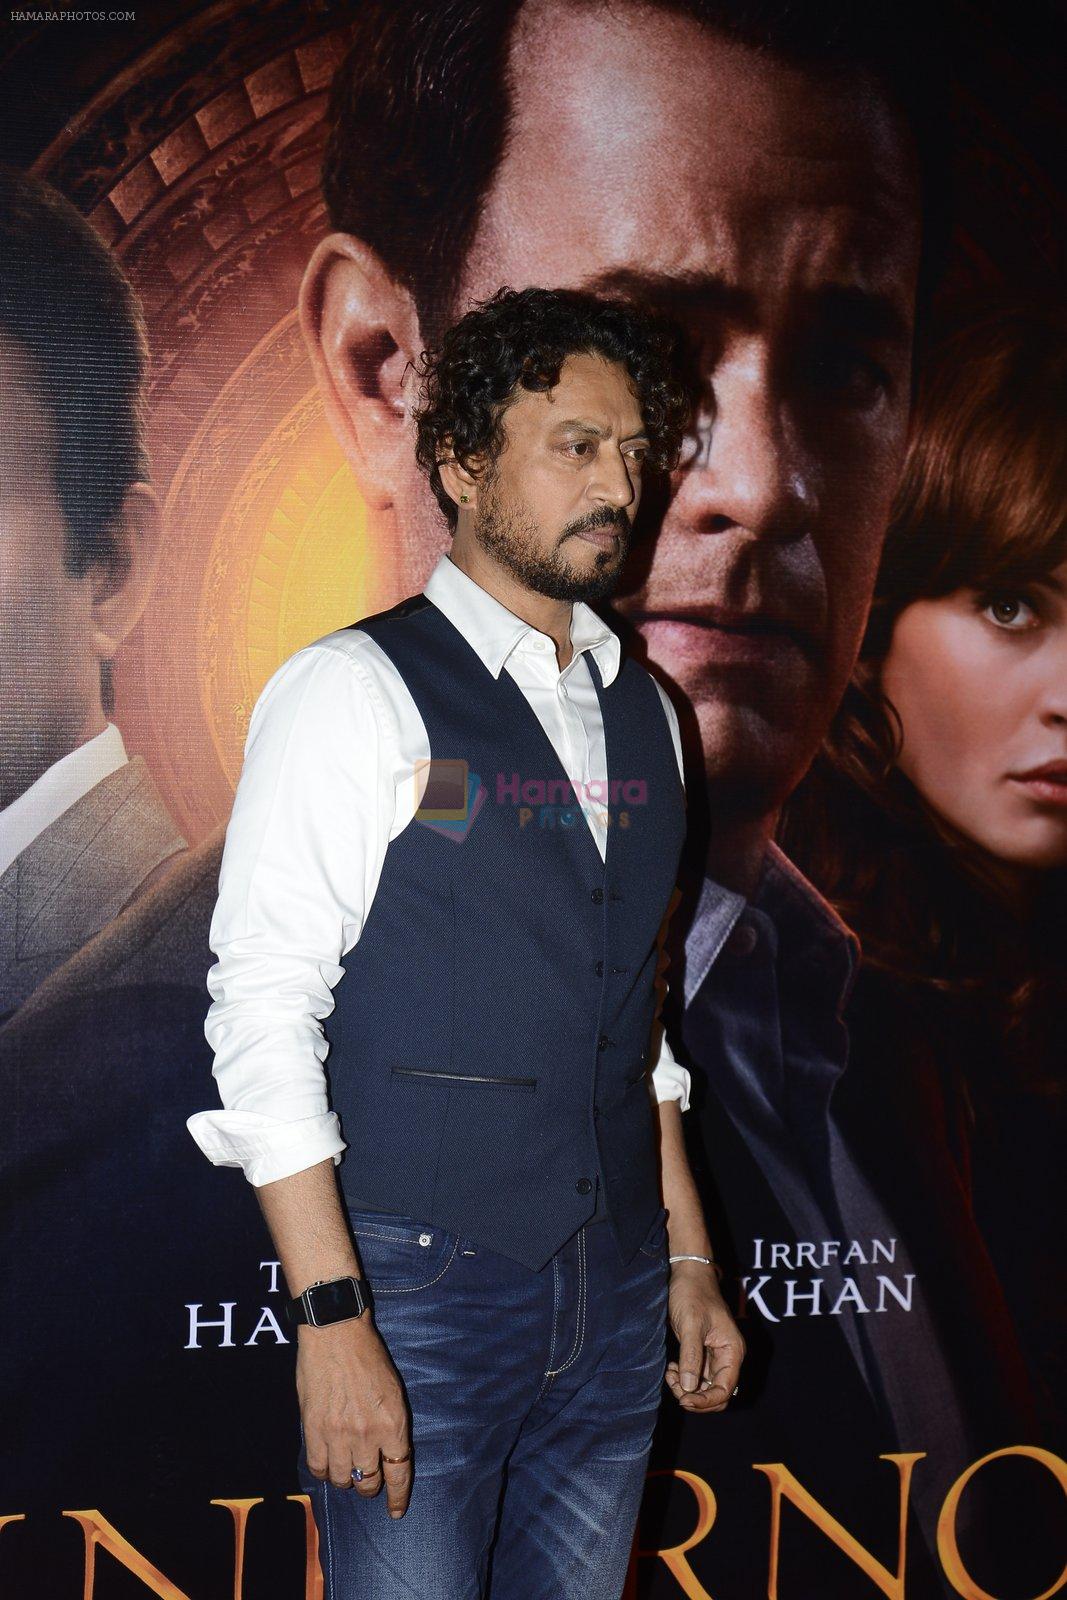 Irrfan Khan at Inferno premiere on 12th Oct 2016